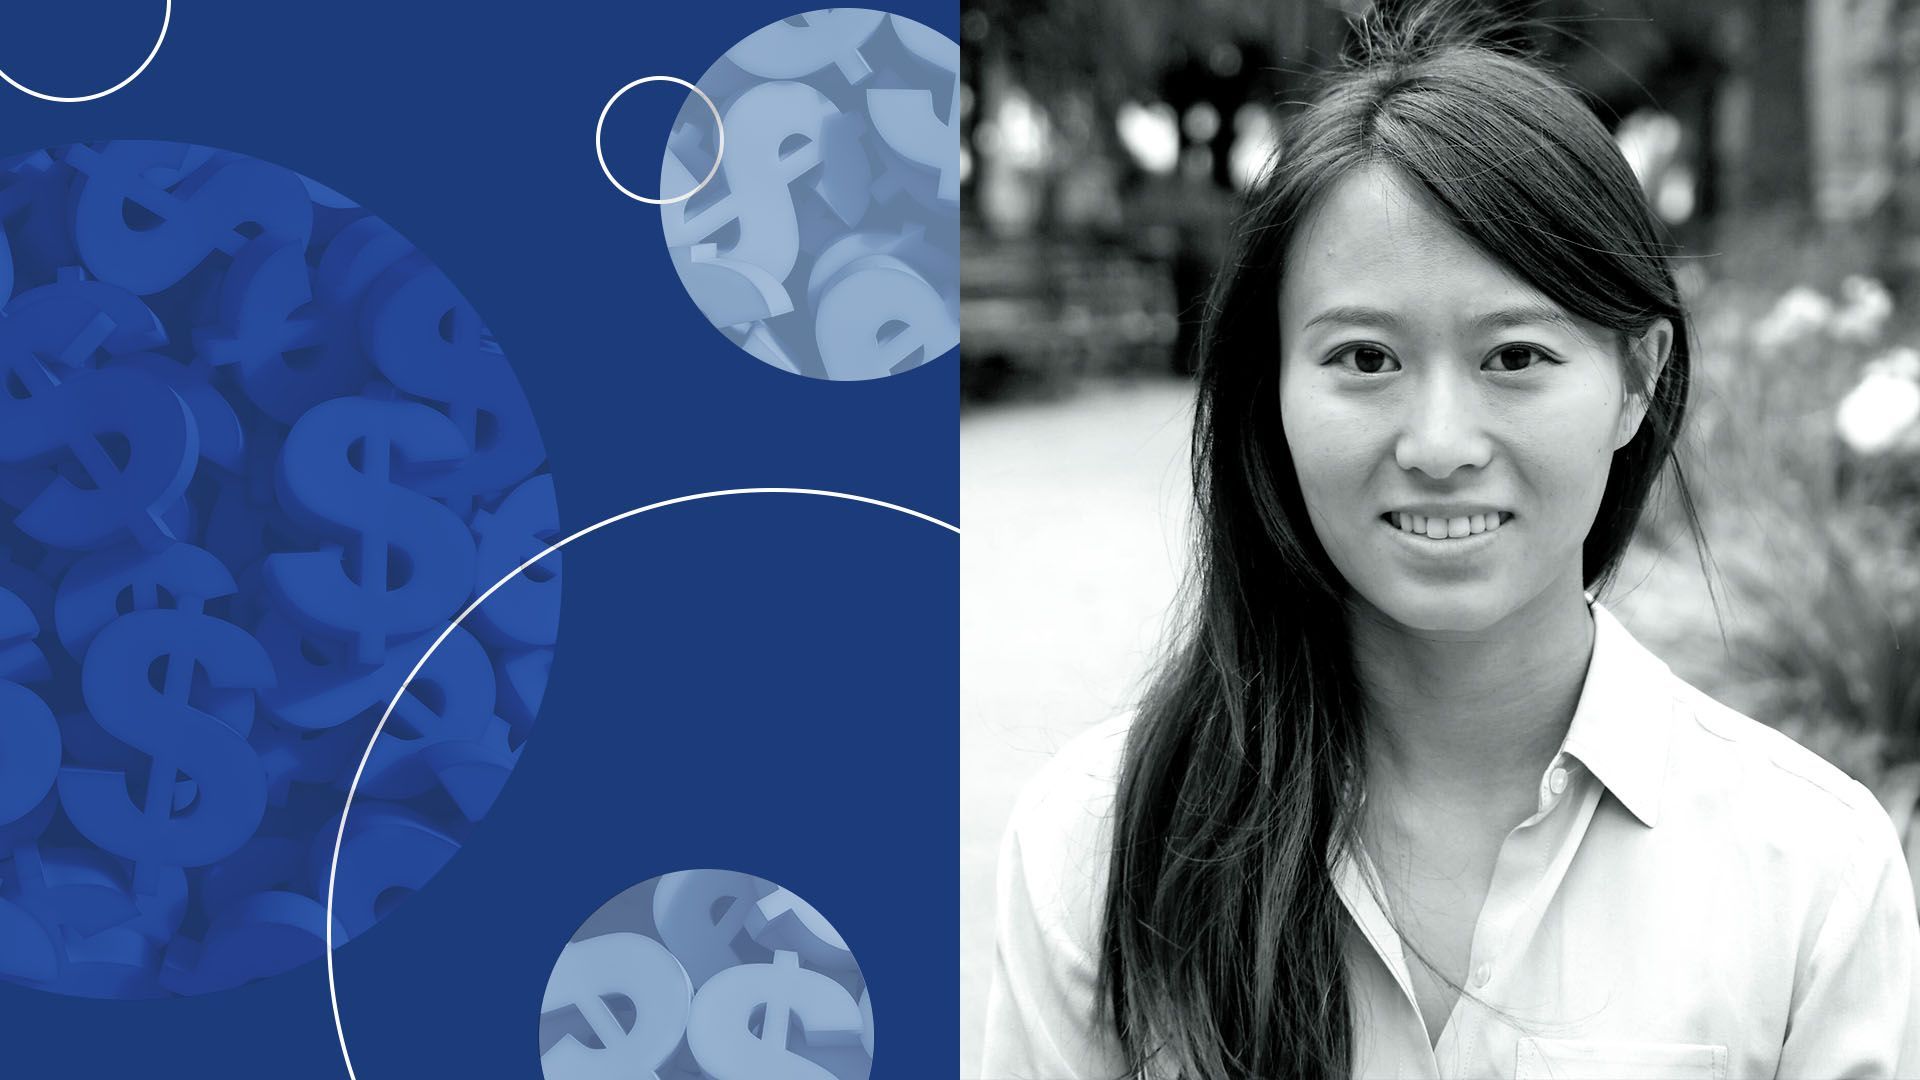 illustration of Kathy Chen of Ulu Ventures surrounded by circles and images of dollar signs